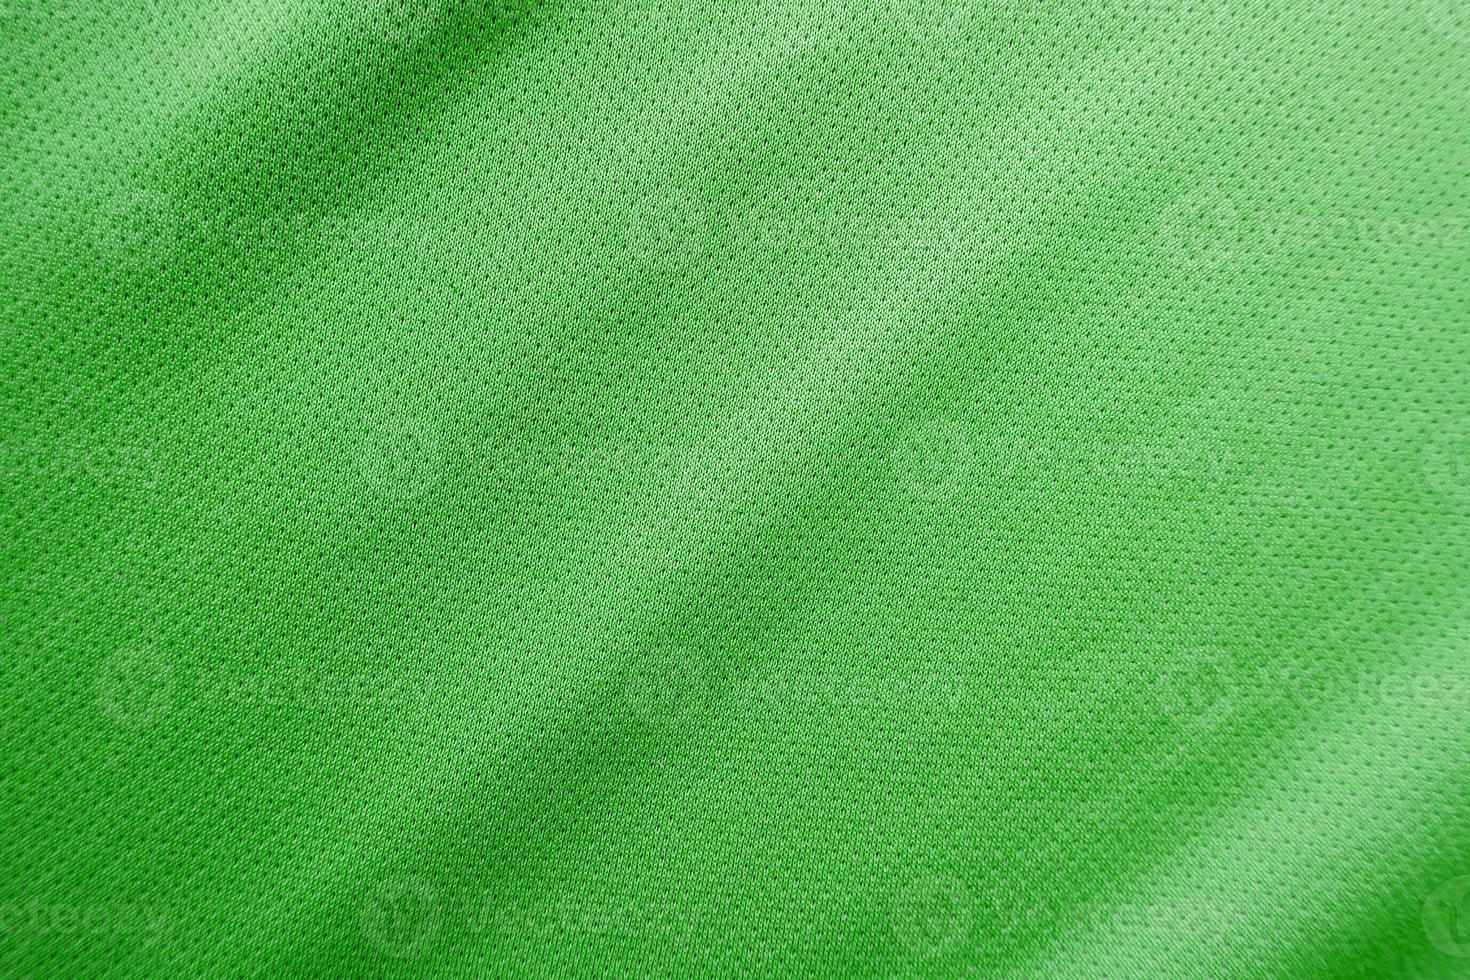 green sports clothing fabric jersey texture photo